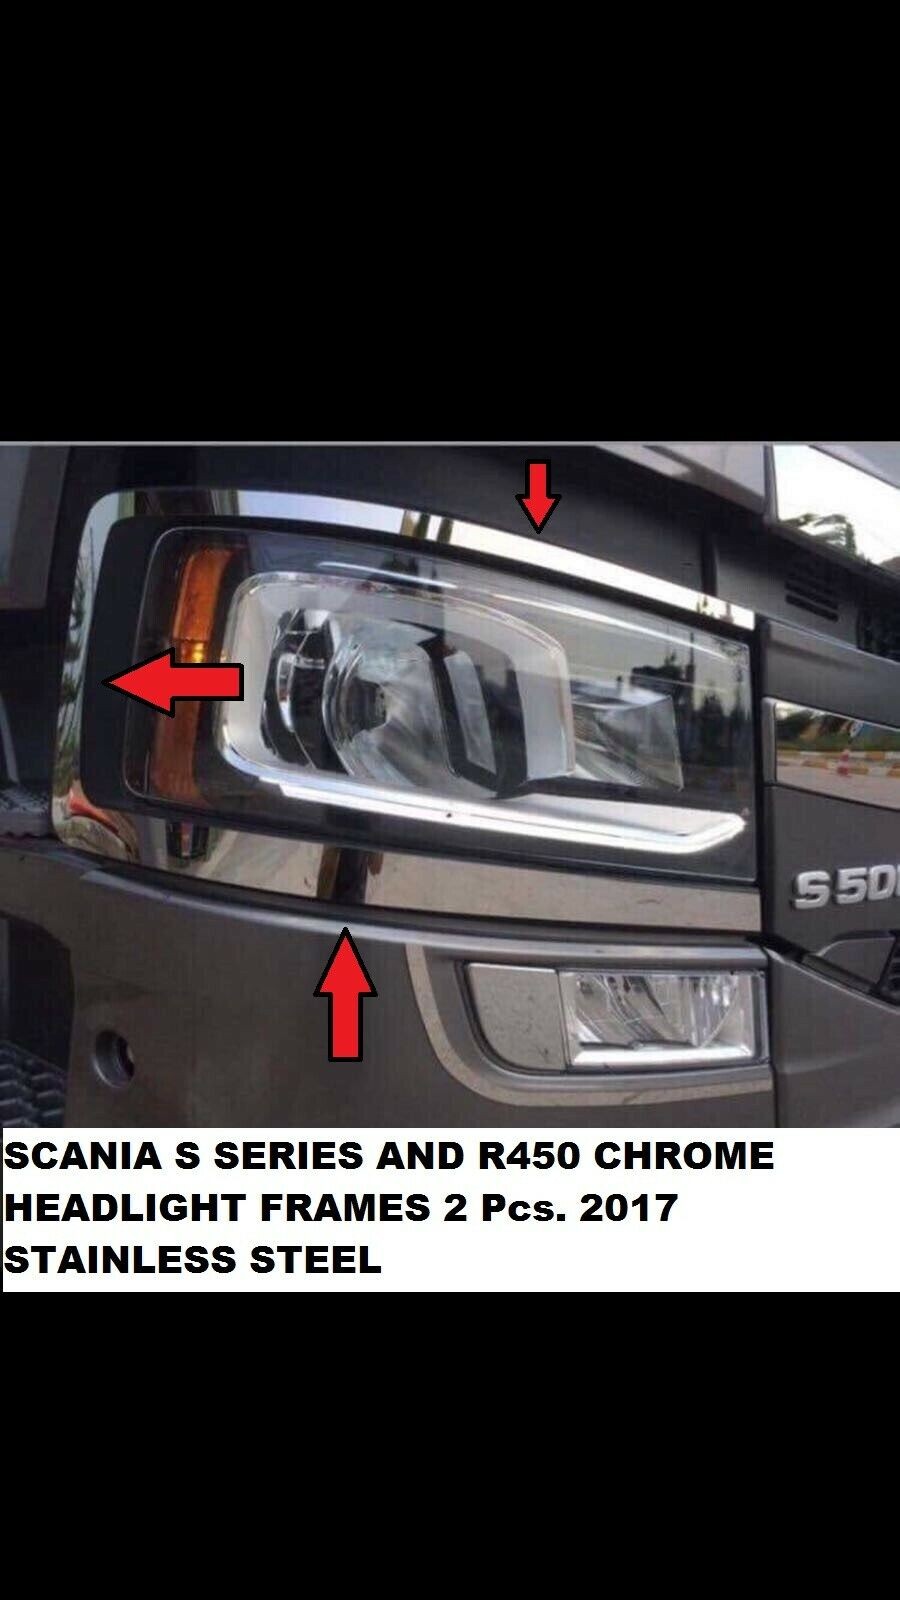 SCANIA S SERIES AND R450 CHROME HEADLIGHT FRAMES 2 Pcs. 2017  STAINLESS STEEL